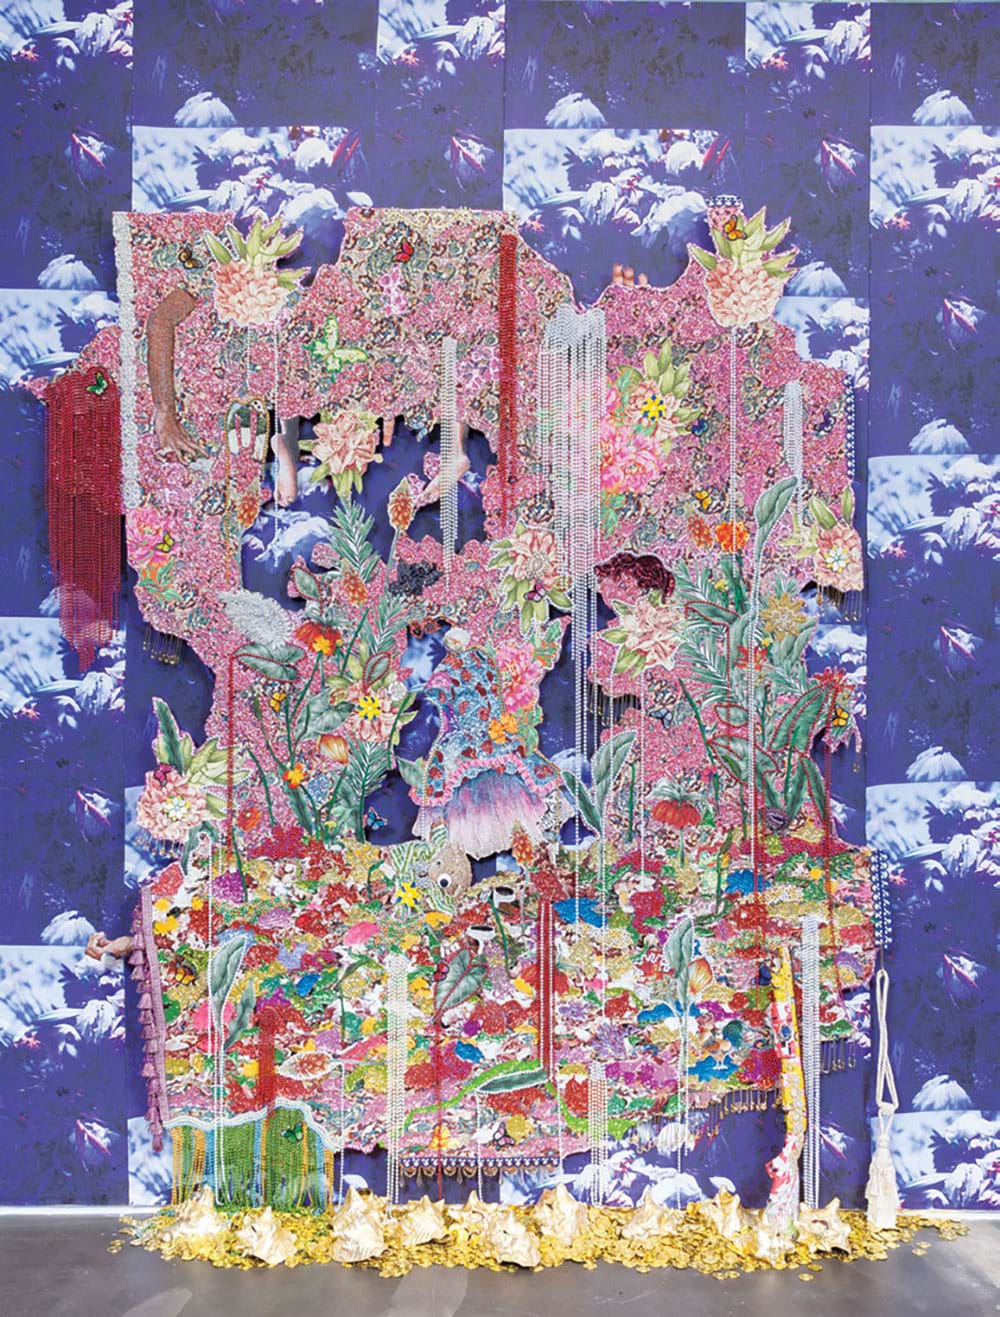 Ebony G. Patterson | … she saw things she shouldn’t have ... for those who bear/bare witness, 2018 | Jacquard-woven tapestry and mixed media on artist-designed fabric wallpaper